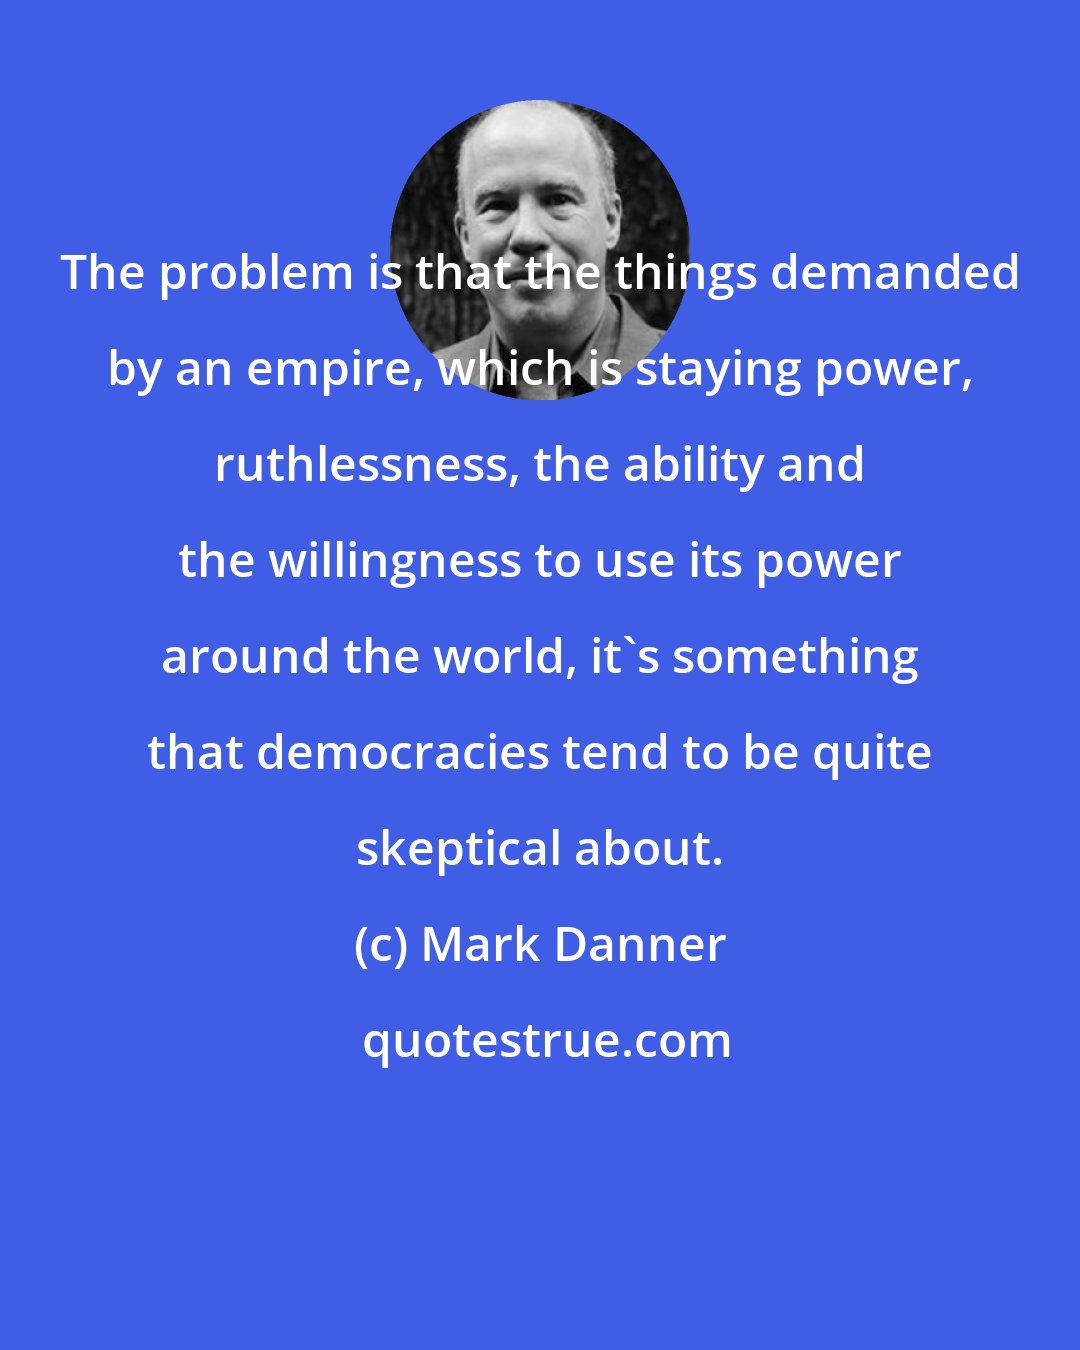 Mark Danner: The problem is that the things demanded by an empire, which is staying power, ruthlessness, the ability and the willingness to use its power around the world, it's something that democracies tend to be quite skeptical about.